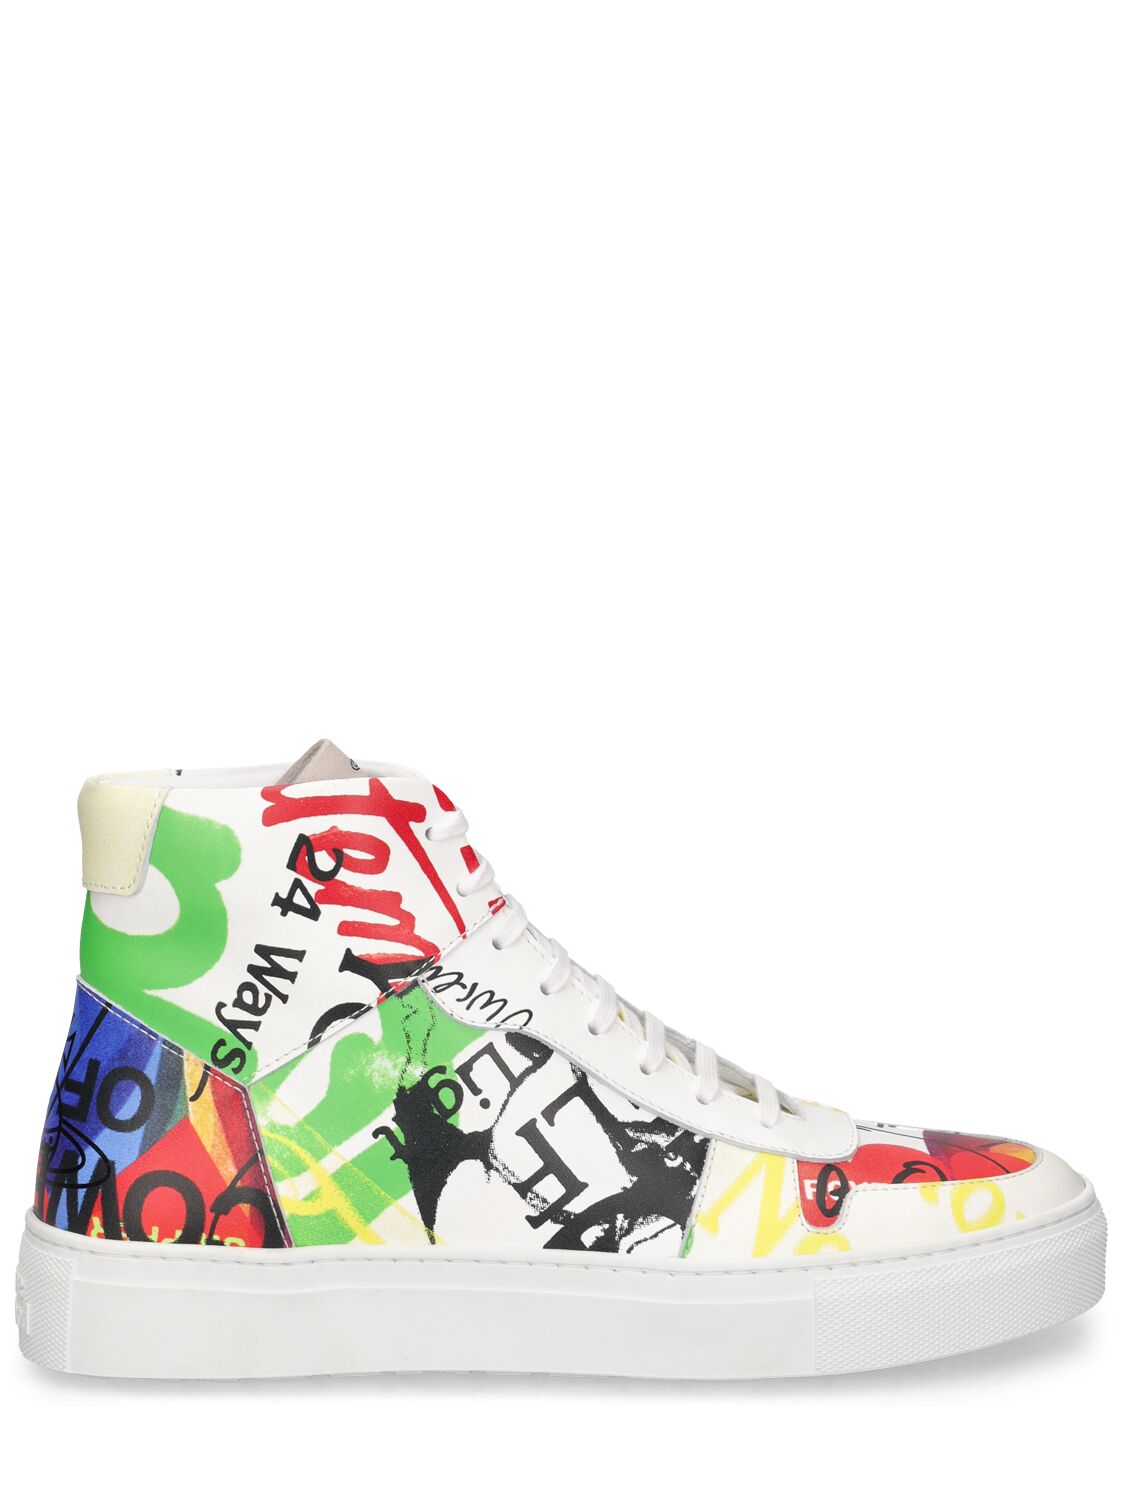 Vivienne Westwood 10mm Classic Leather High Top Sneakers In Multicolor